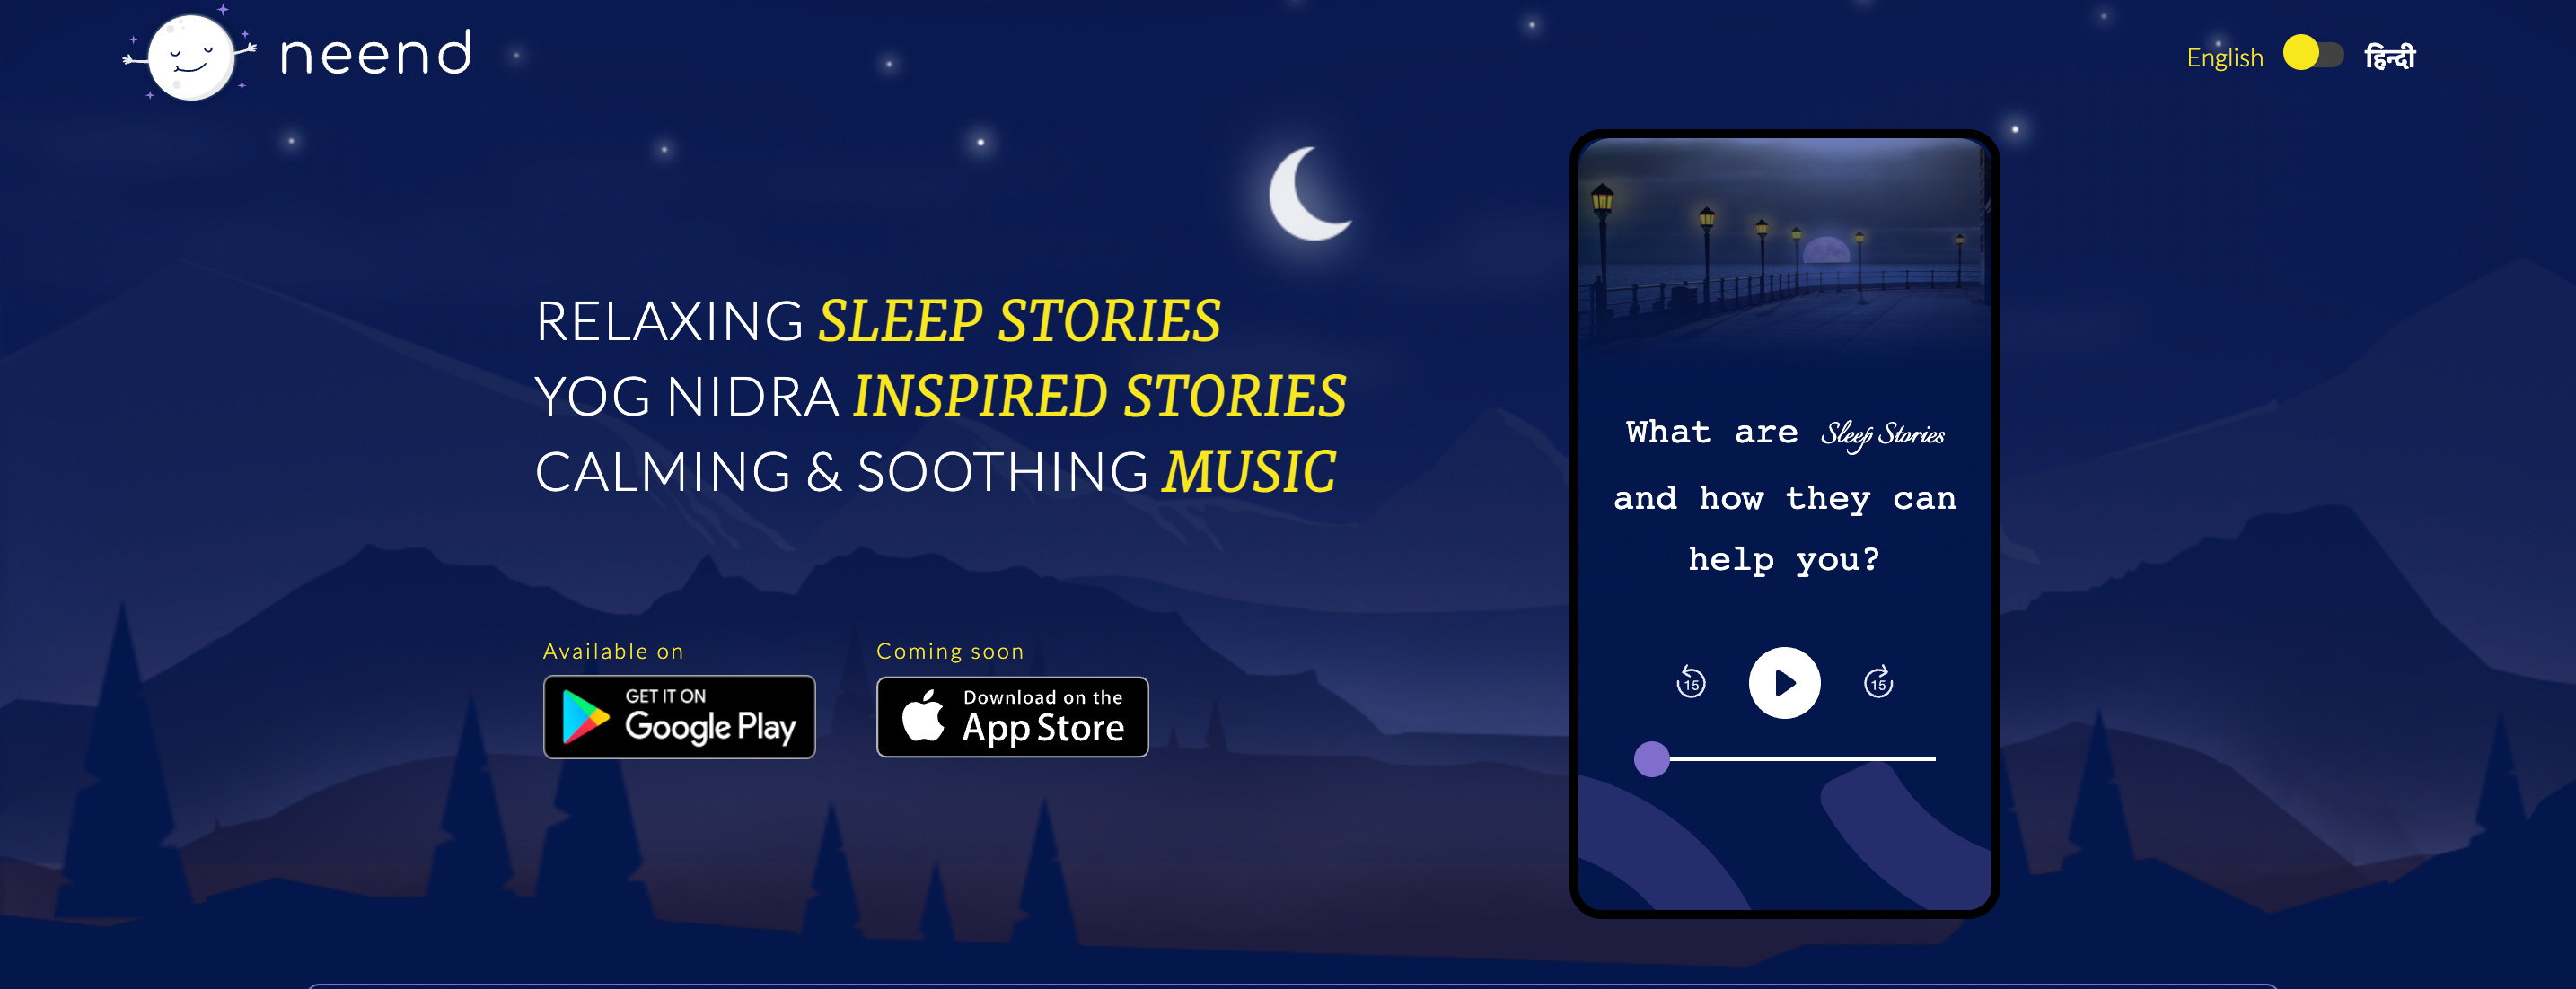 [App Friday] For a good night’s sleep, Neend offers content in regional languages

